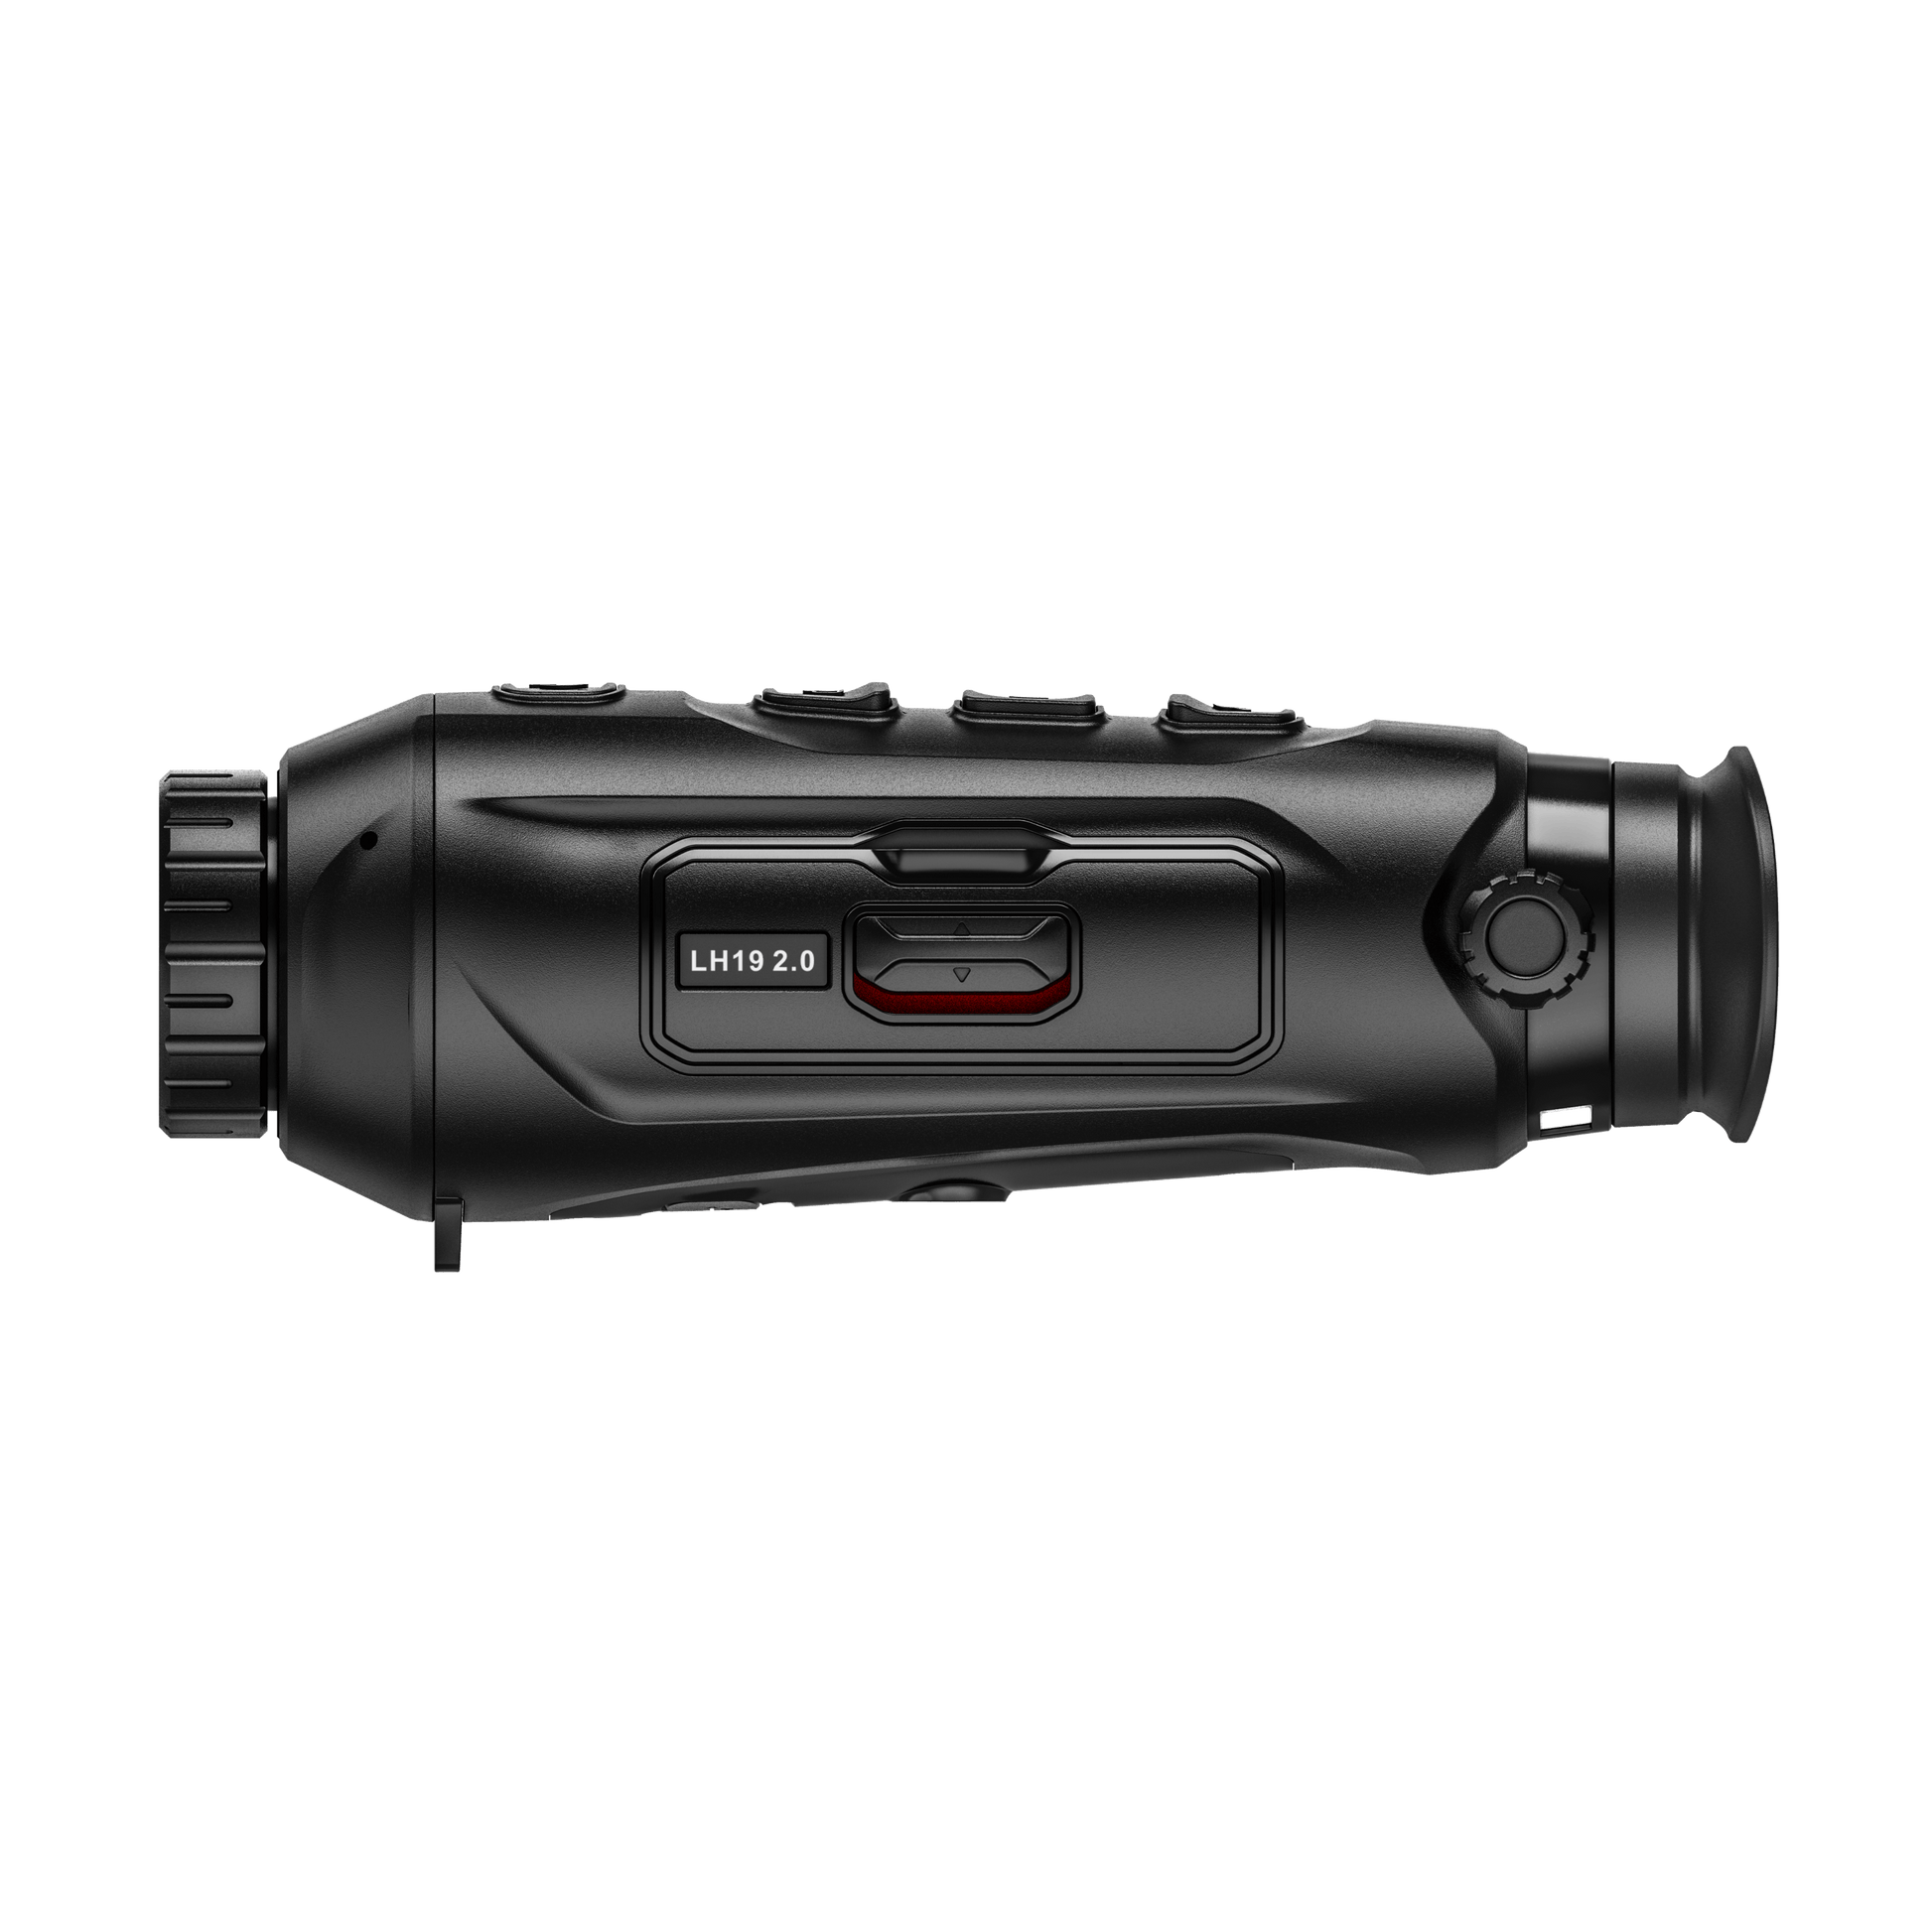 Lynx LH19 2.0 Handheld Thermal Spotter Left side View